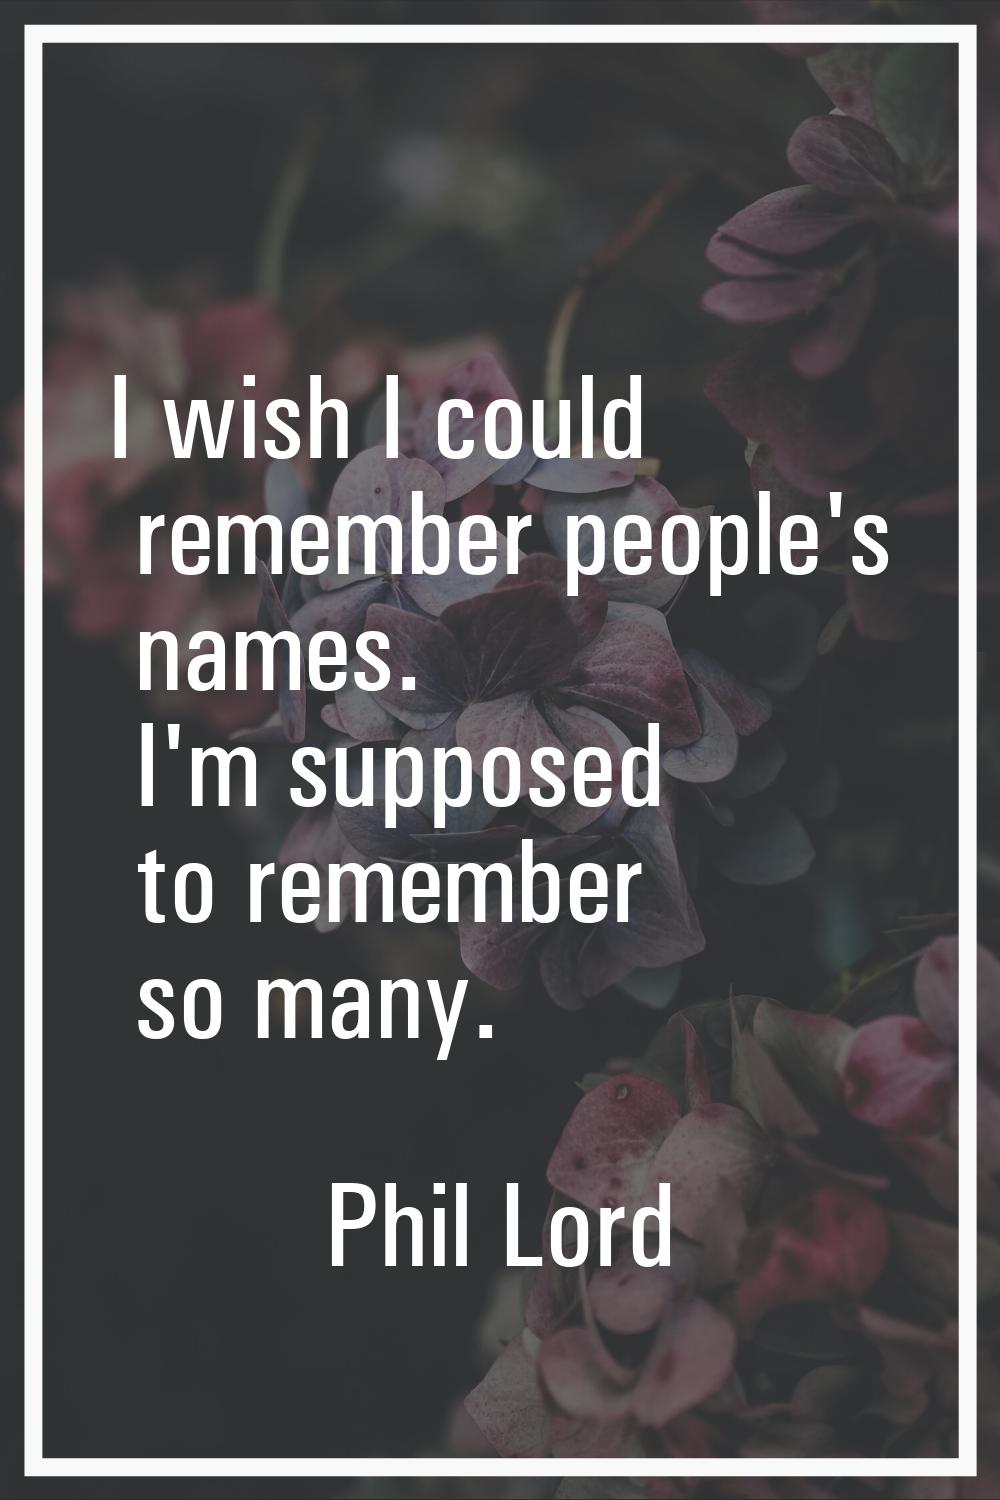 I wish I could remember people's names. I'm supposed to remember so many.